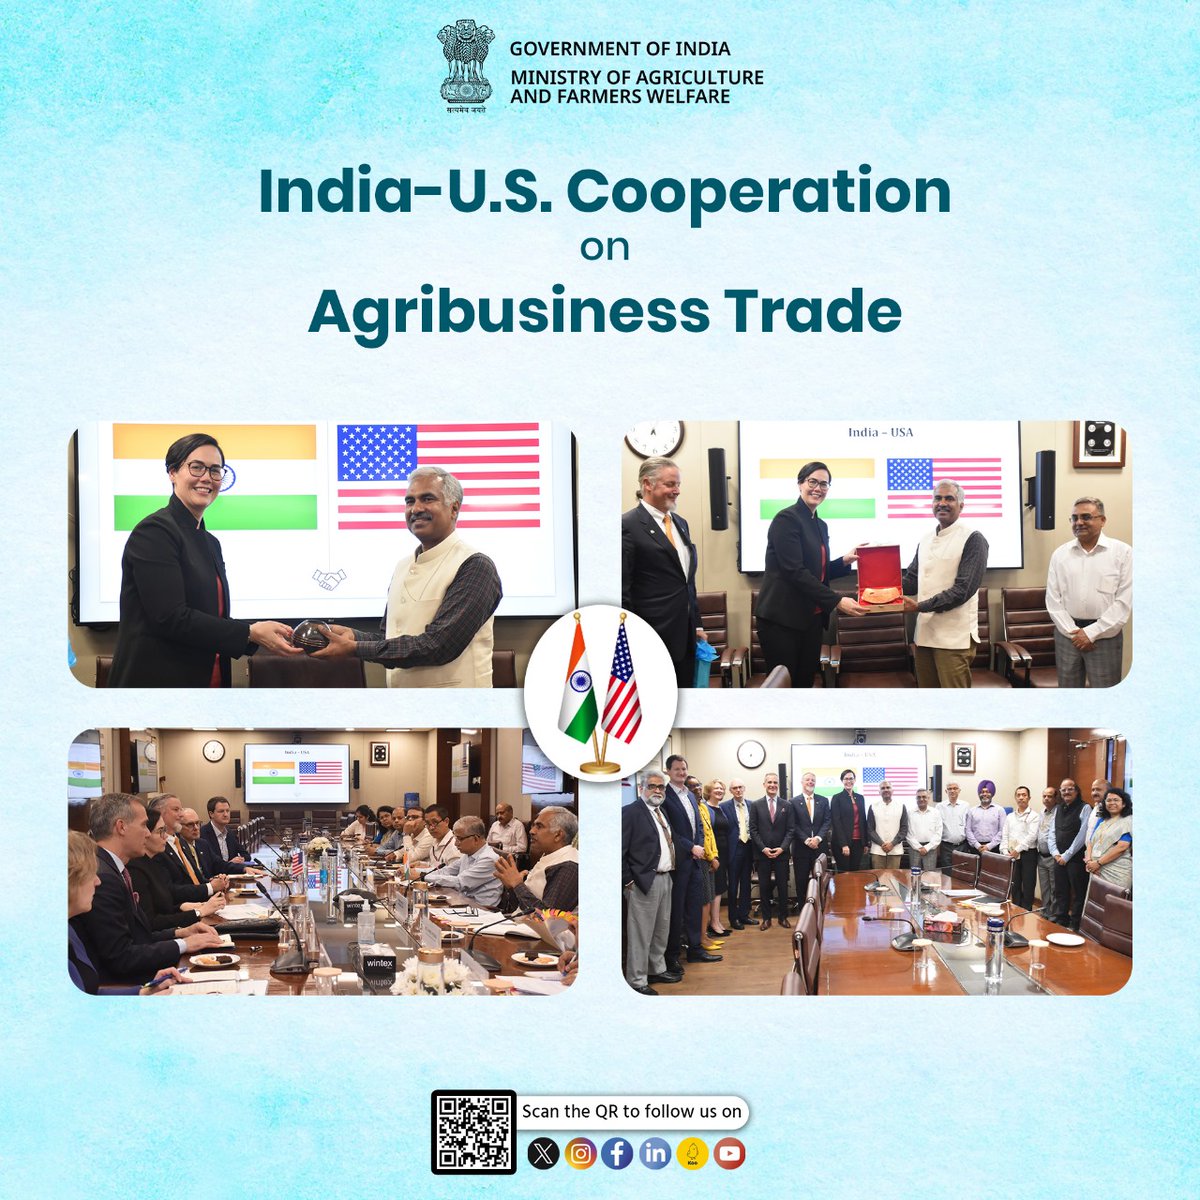 A meeting was held between Shri Manoj Ahuja, Secretary, Department of Agriculture & Farmer's Welfare & Ms. Alexis M. Taylor, Under Secretary, Trade & Foreign Agricultural Affairs of the United States Department of Agriculture at Krishi Bhawan, New Delhi, today. #agribusiness